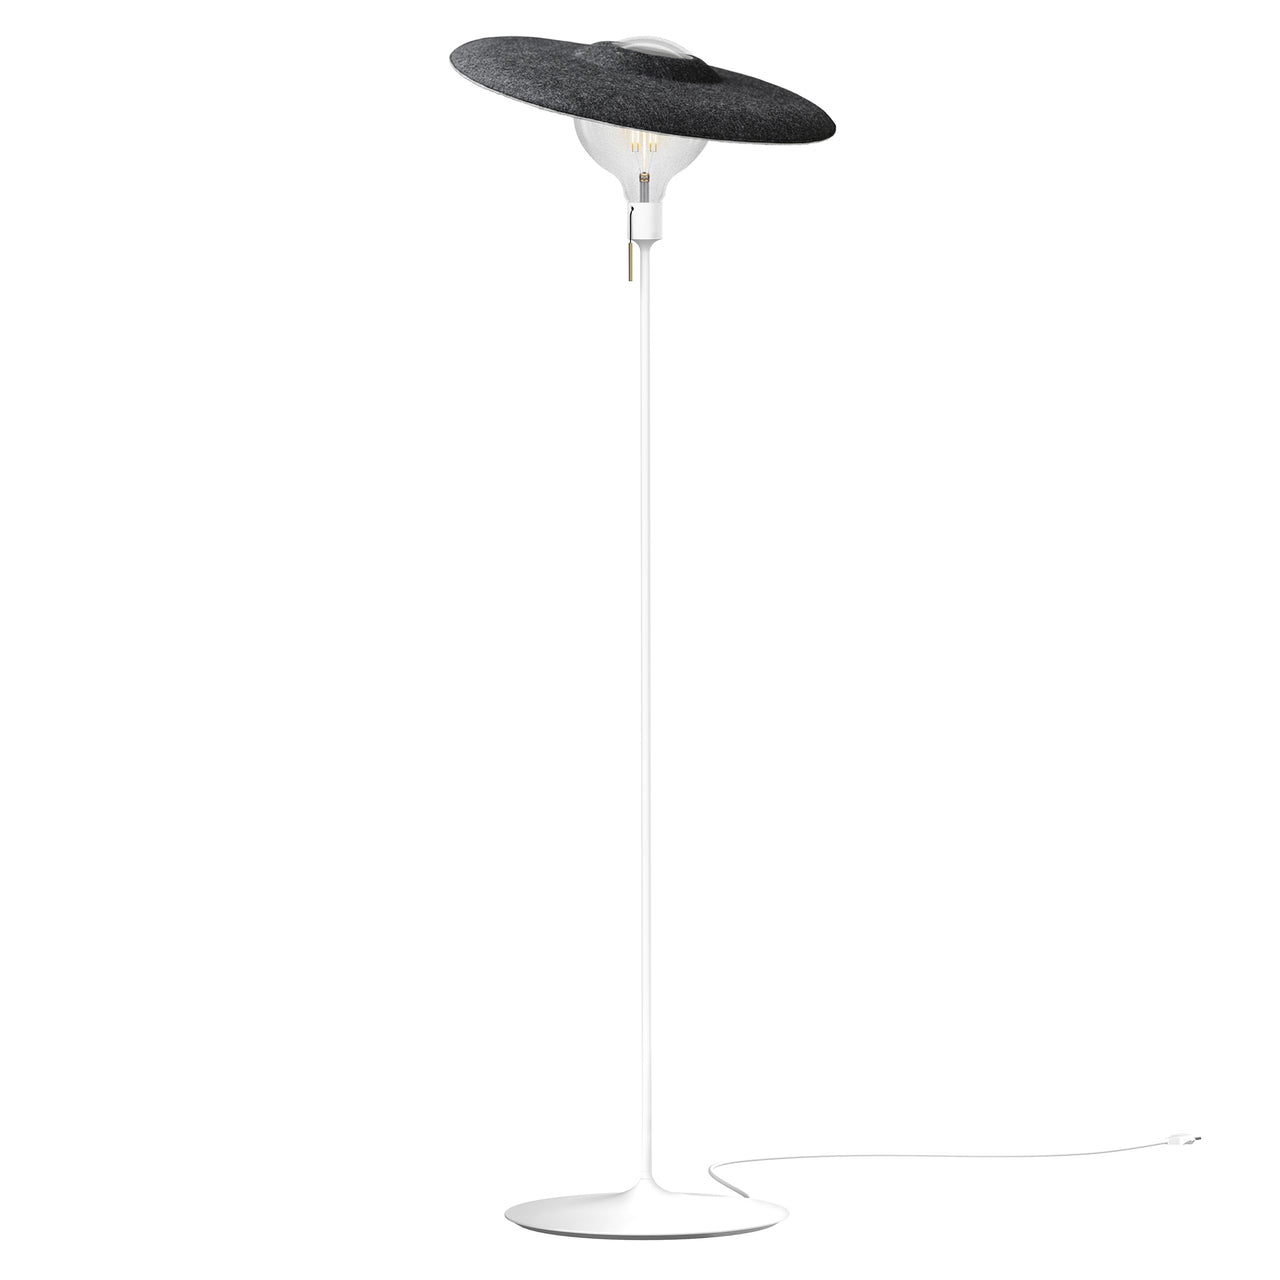 Shade Champagne Floor Lamp: White + With Bulb (3 W)